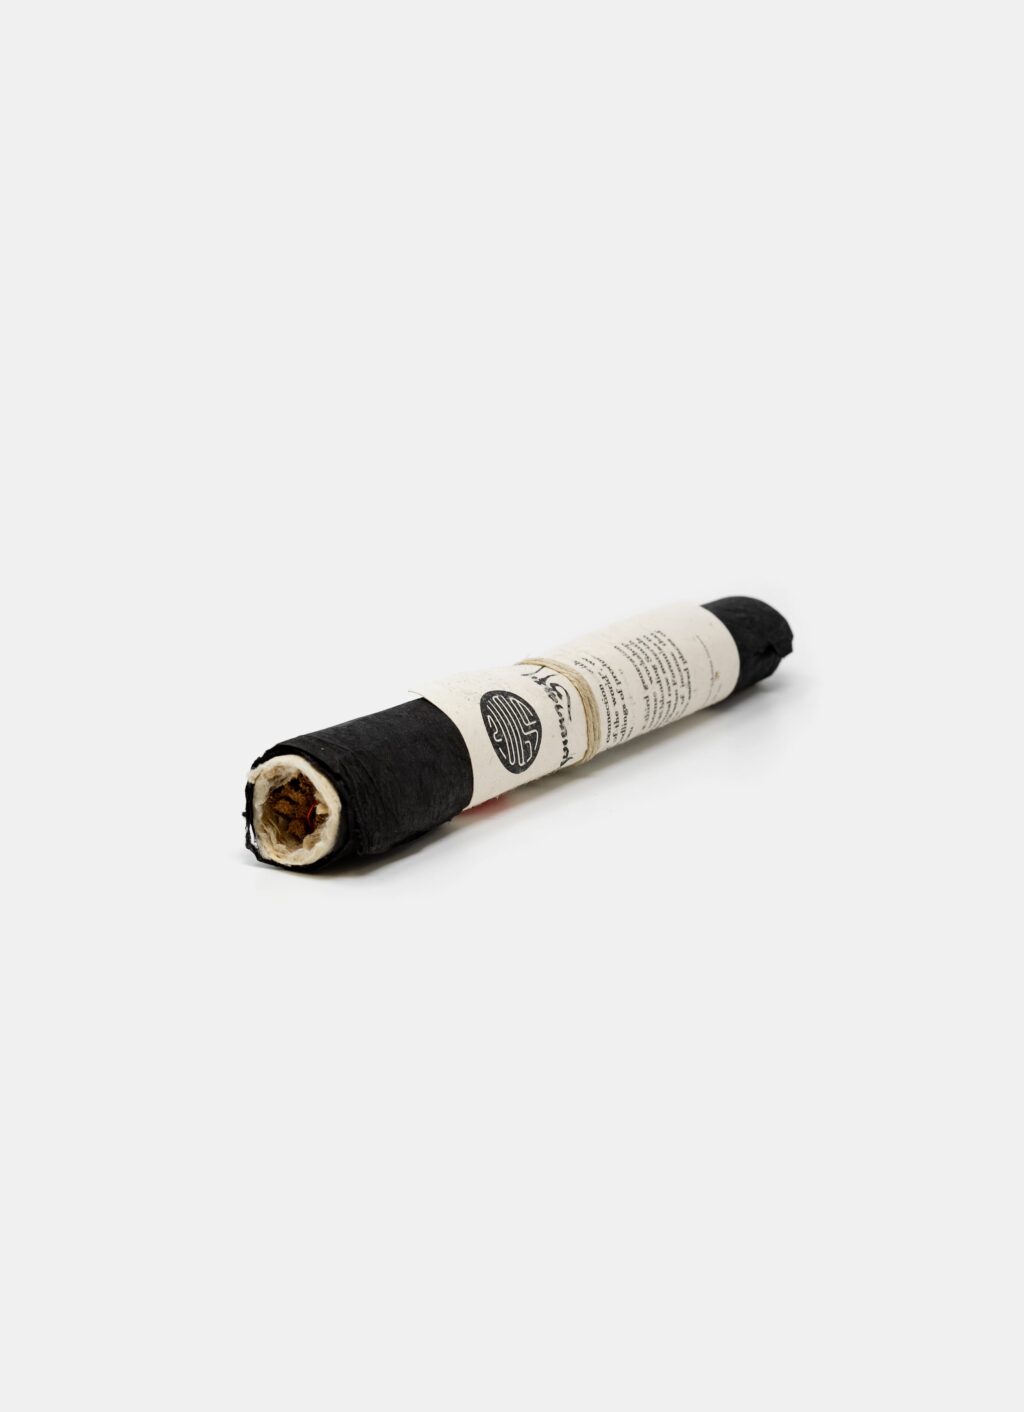 Incausa - Certified Responsive and Faire Trade - Lhasa Incense Scroll